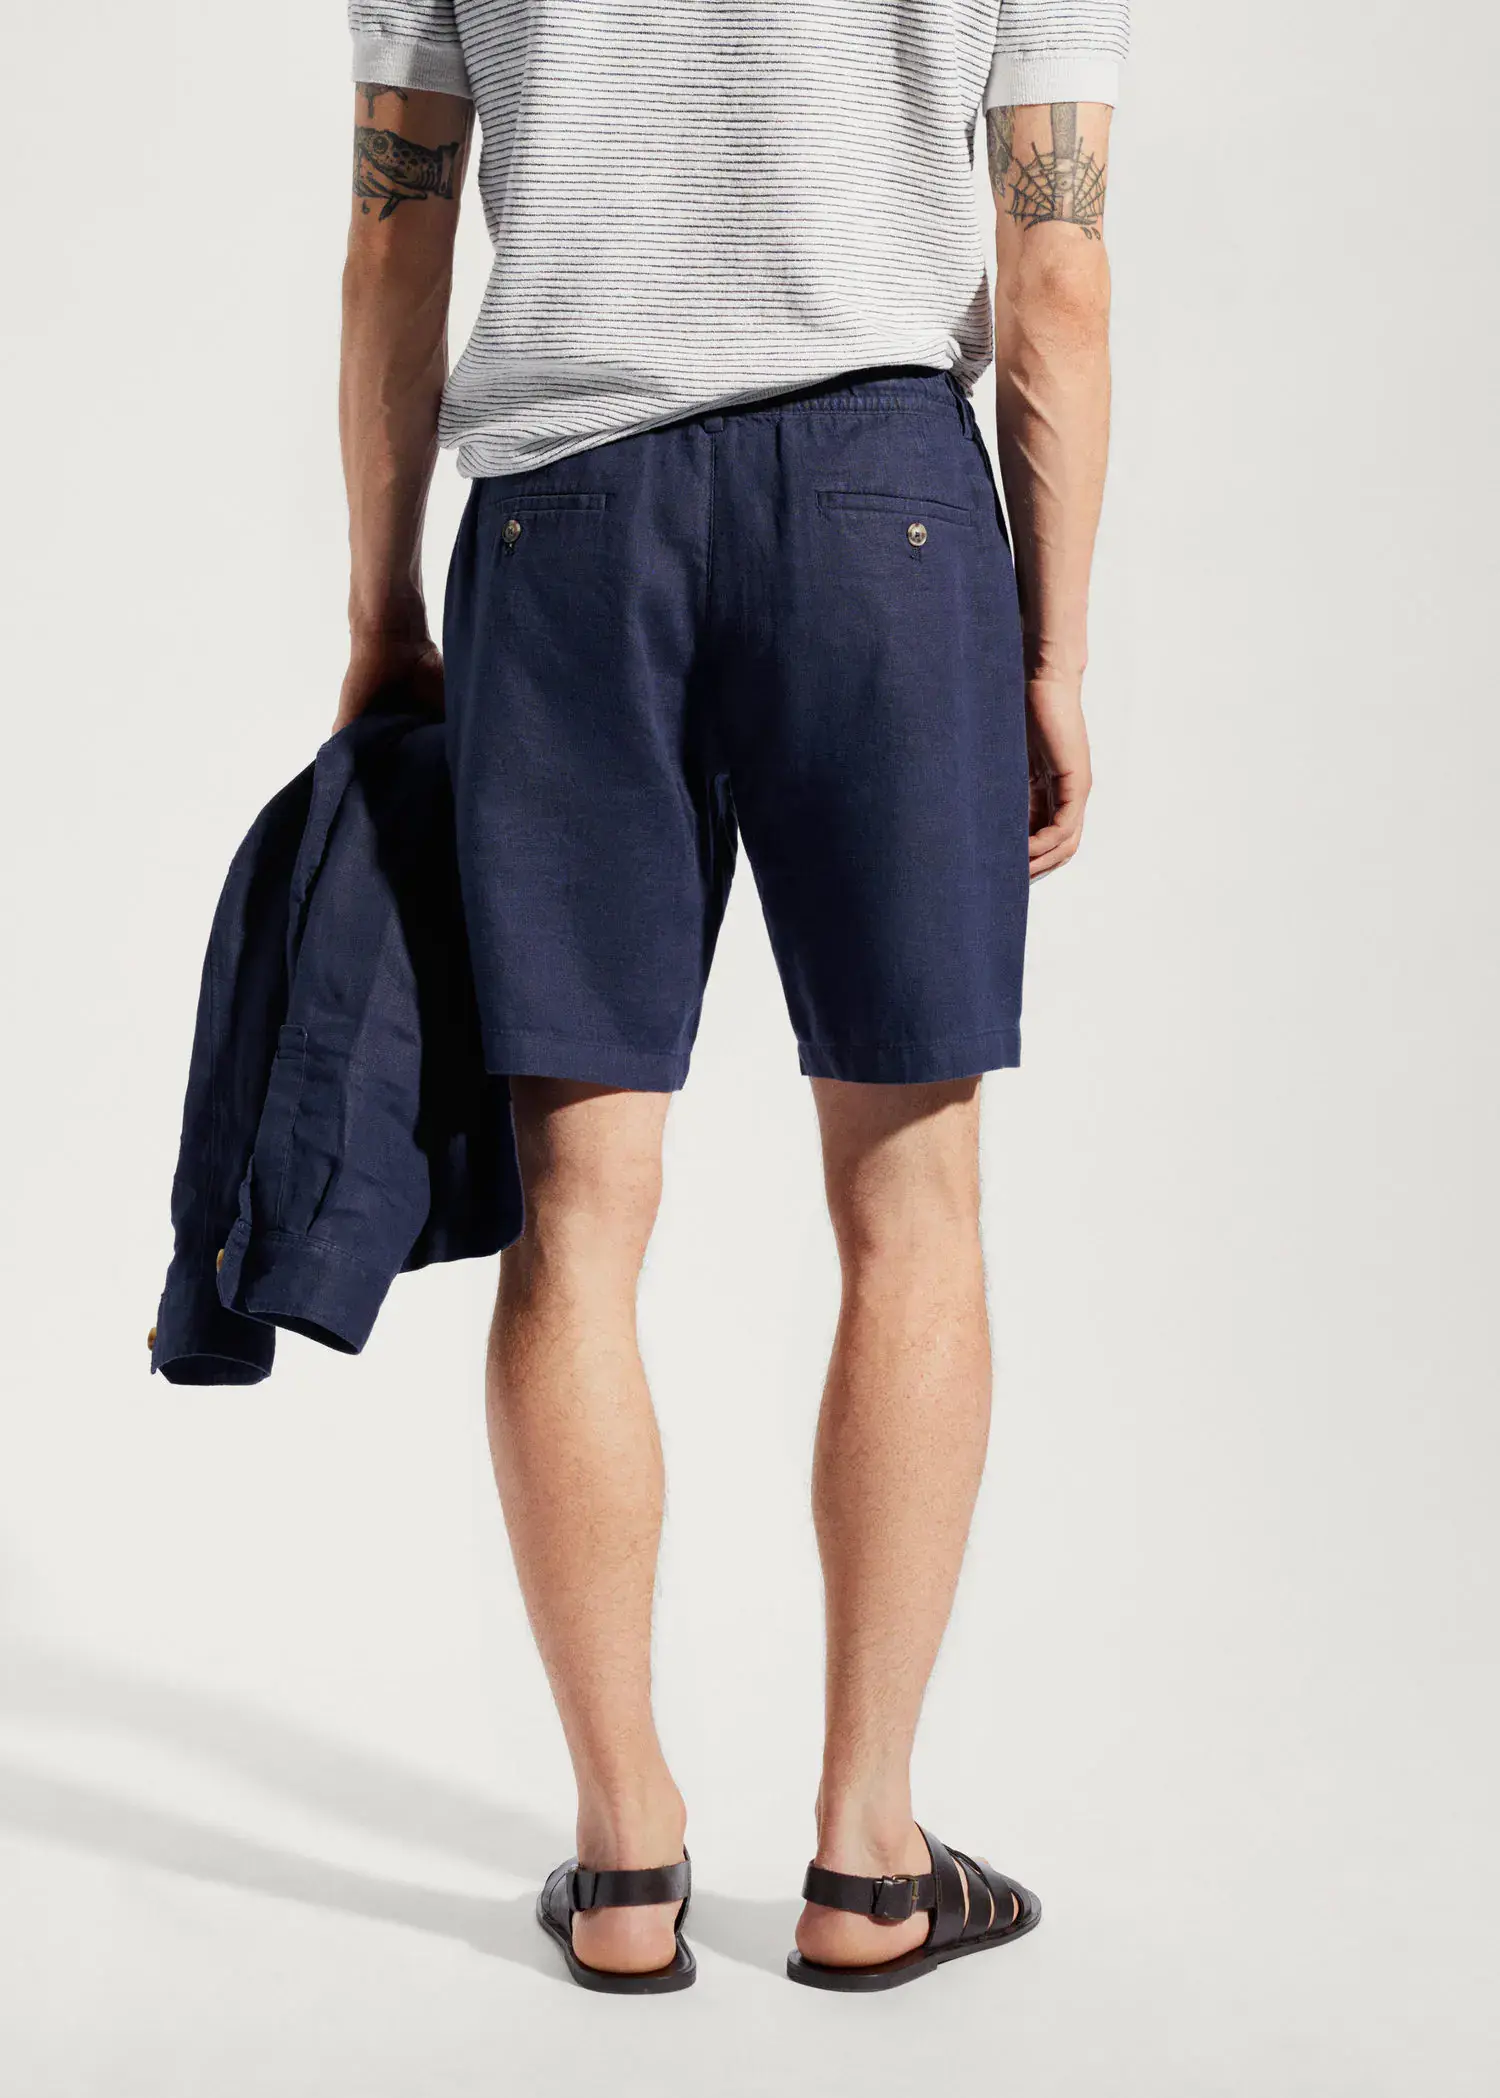 Mango 100% linen bermuda shorts with drawstring. a man in blue shorts is holding a jacket. 